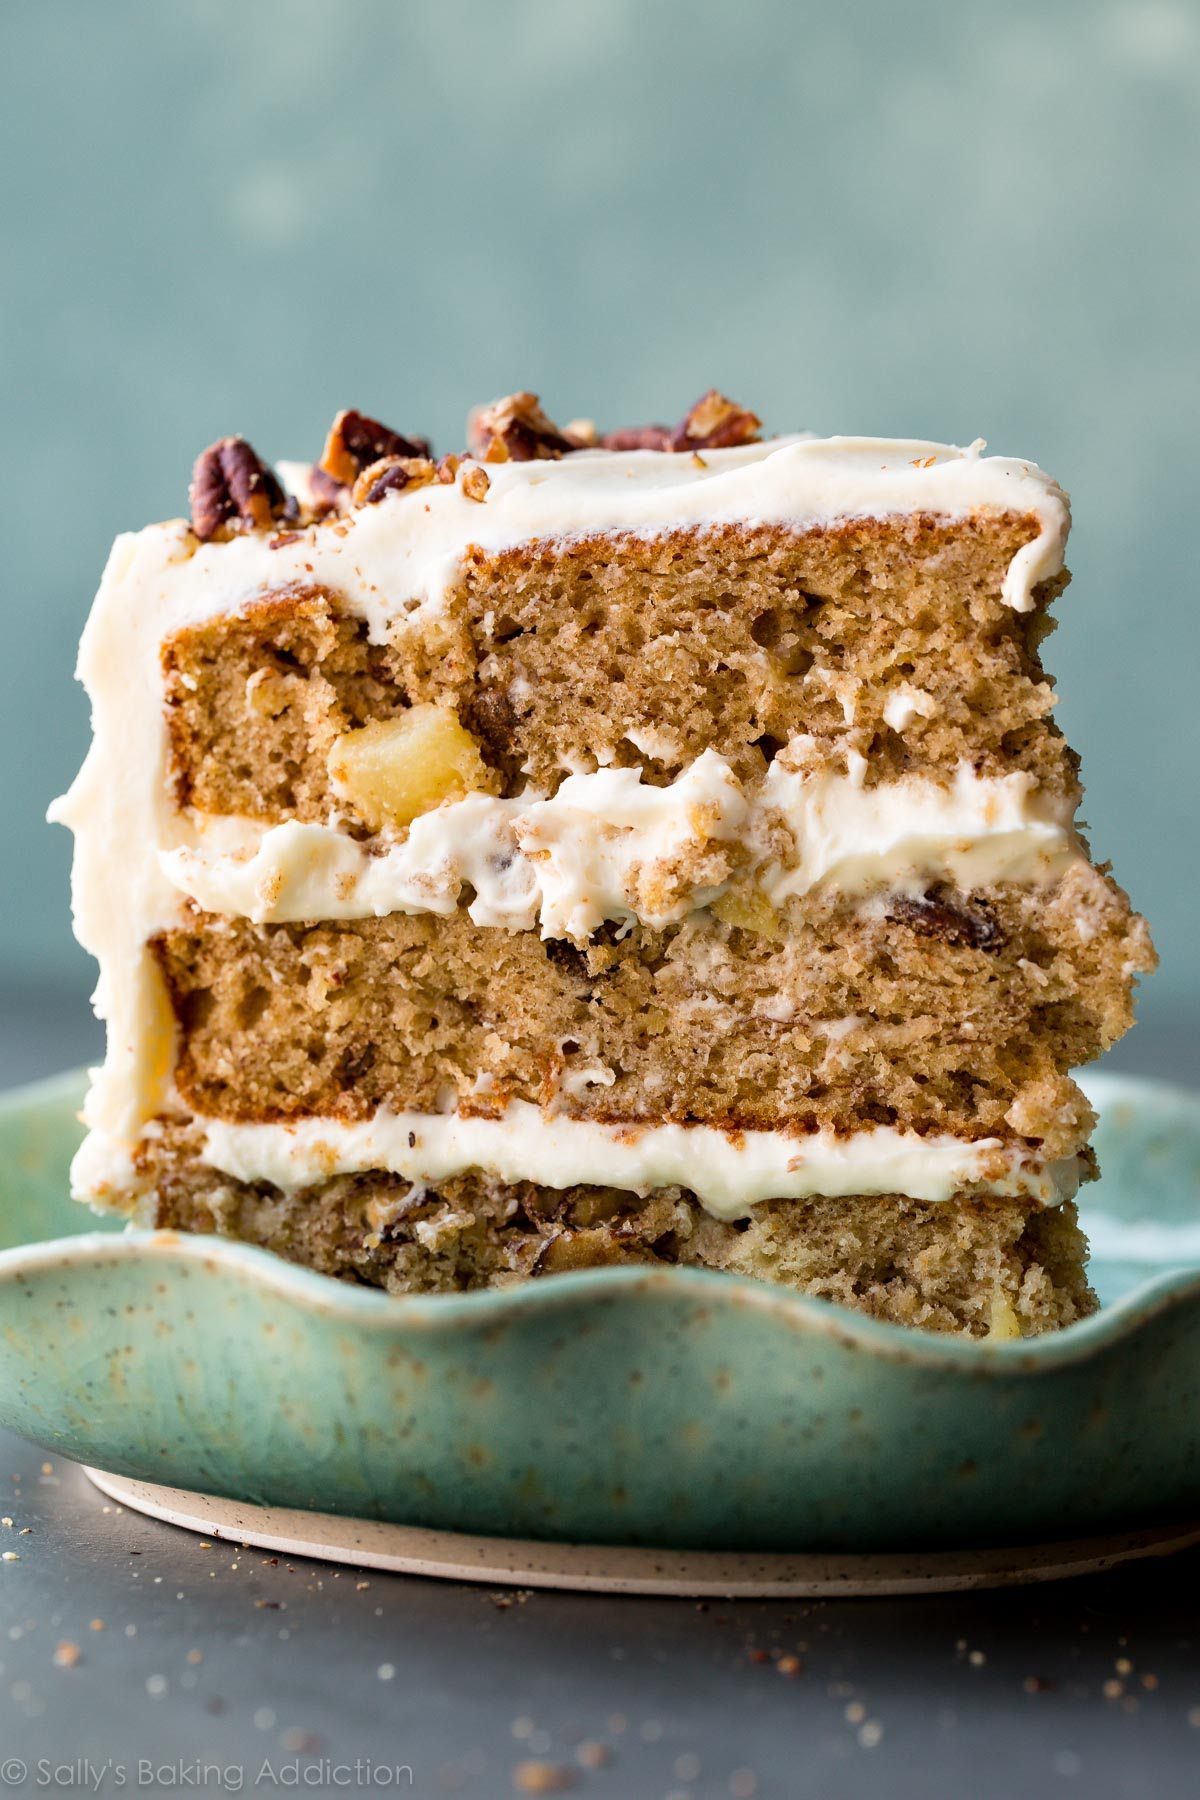 Close-up of a three-tiered hummingbird cake with white frosting and pecan pieces on a blue plate